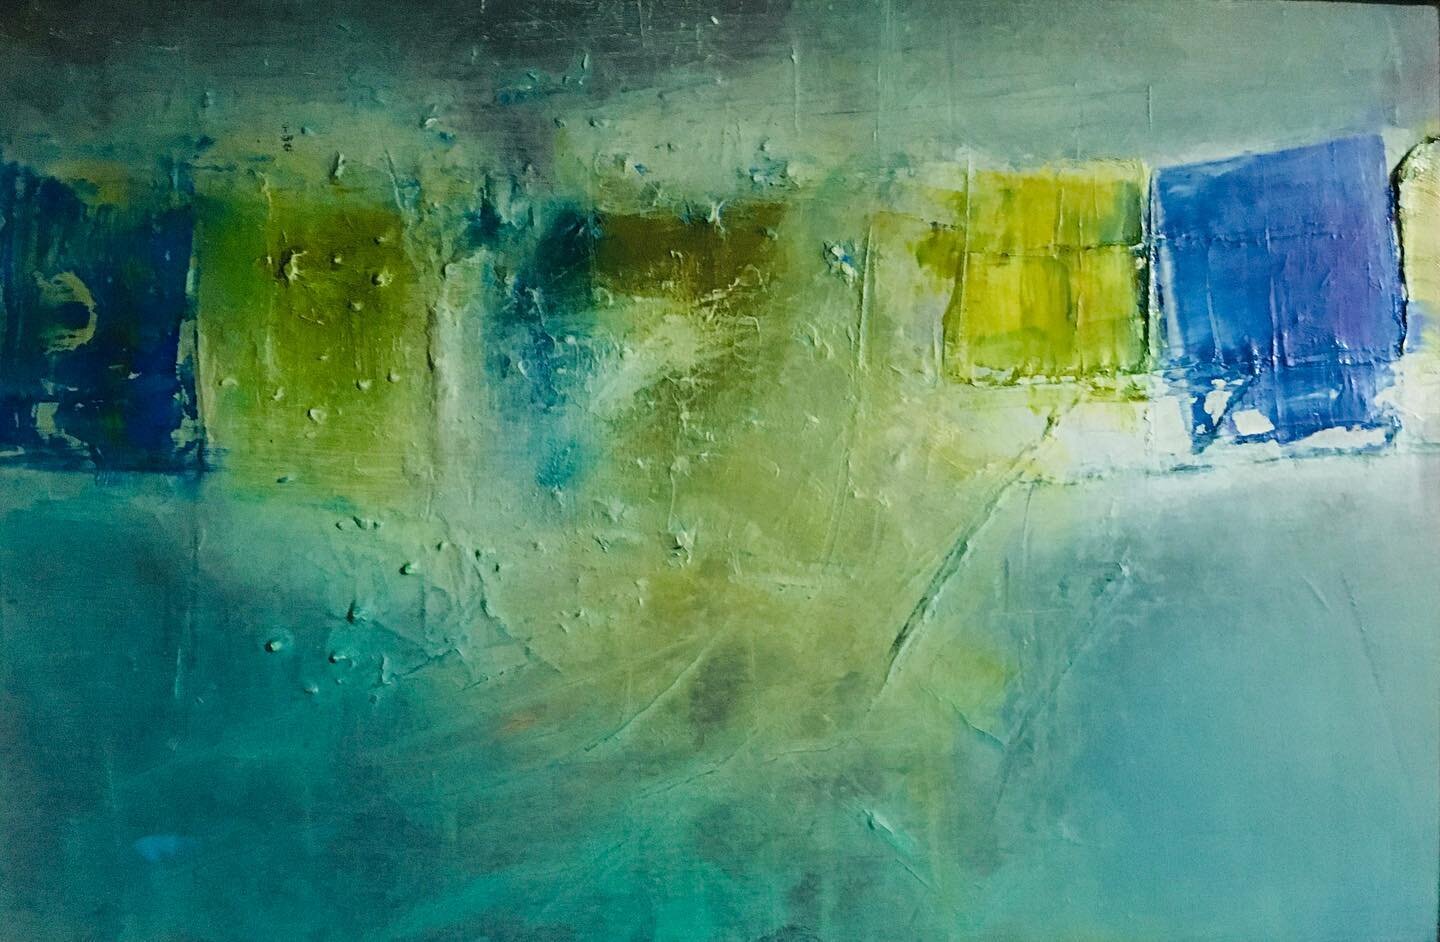 Welcome to February......Oil on Board. 26x38cm.........
More on my website: 
www.louise-holgate.com
All enquiries welcome
#buyartonline
#abstractmag  #highgateart  #janenewberydulwich #chelseaartsclub #affordableartfairuk #somerset #colour #light #ab